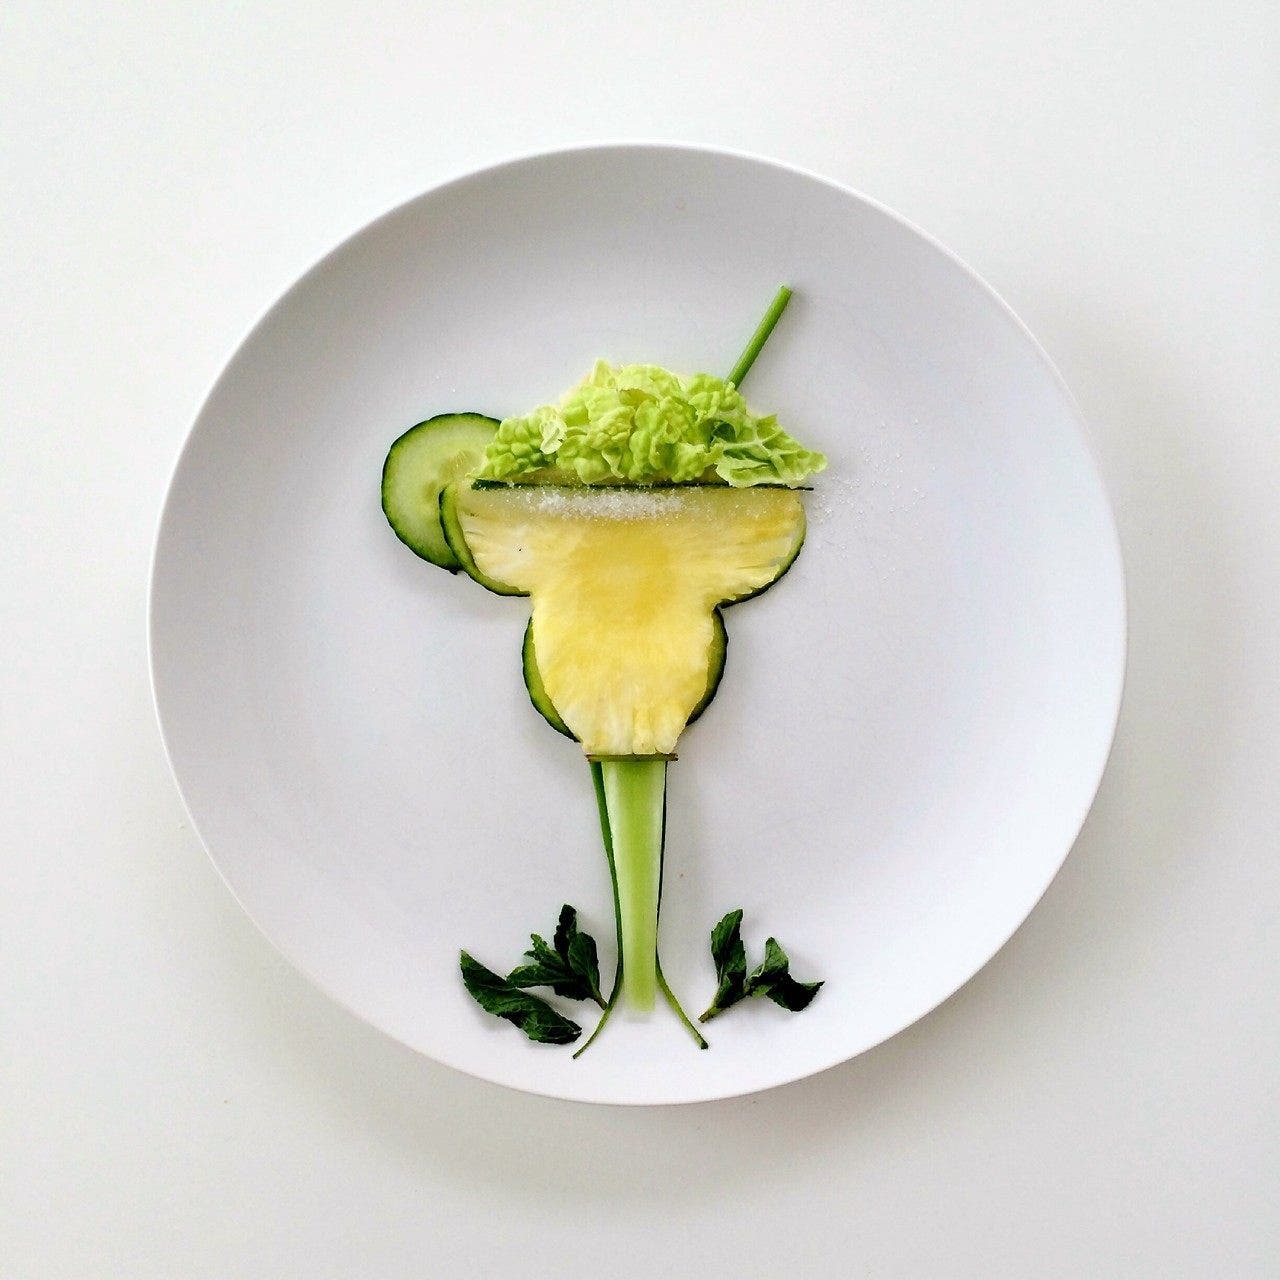 Culinary Canvas features bold and beautiful food art